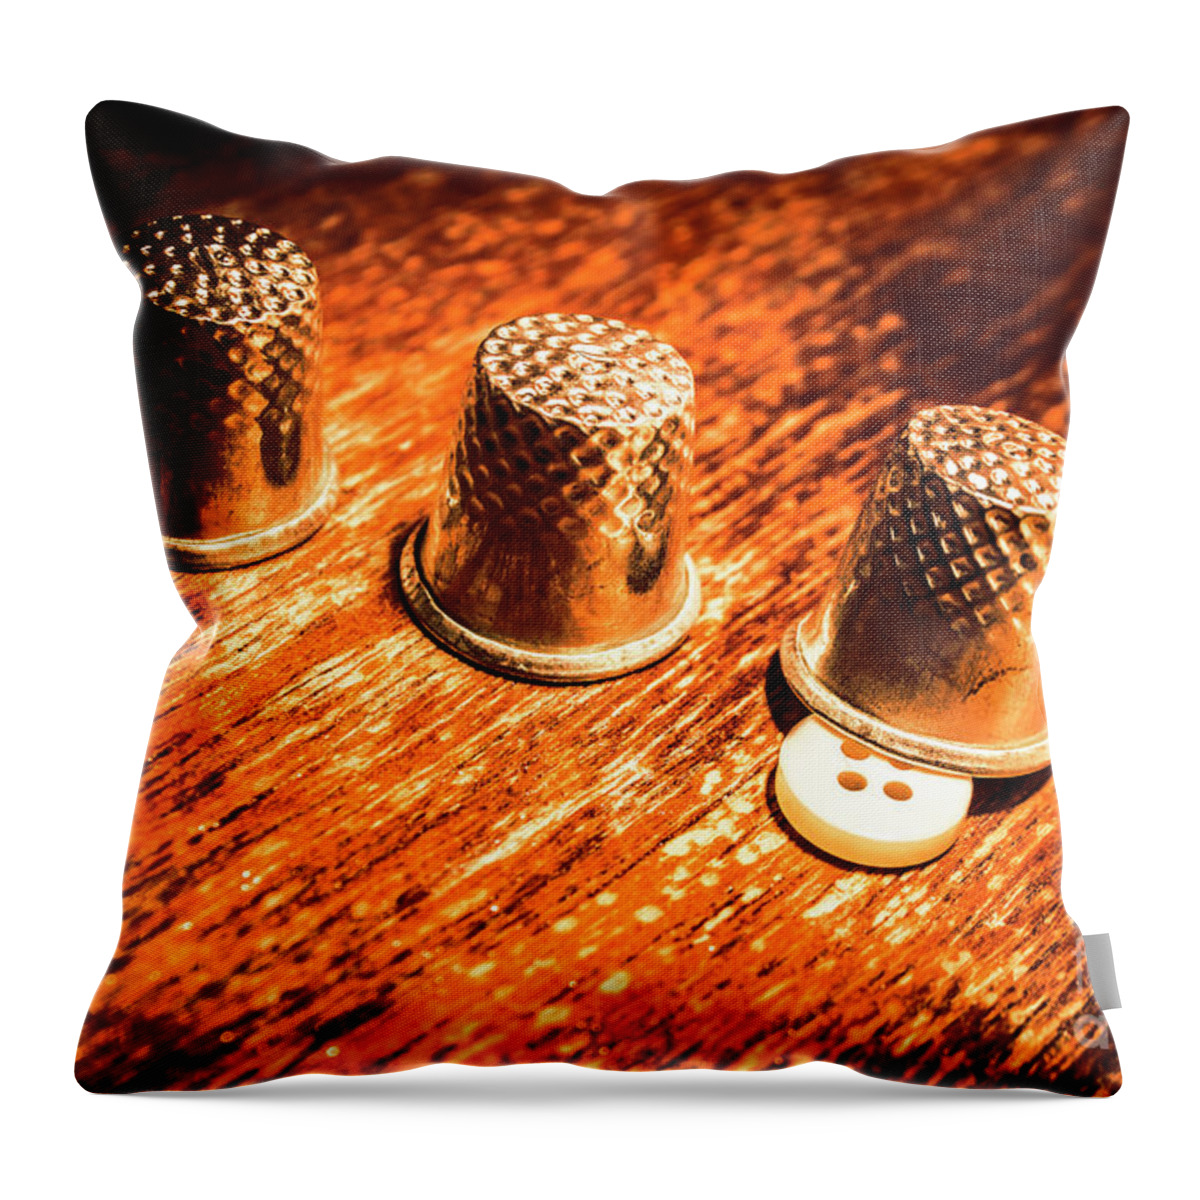 Thimble Throw Pillow featuring the photograph Crafty alterations by Jorgo Photography